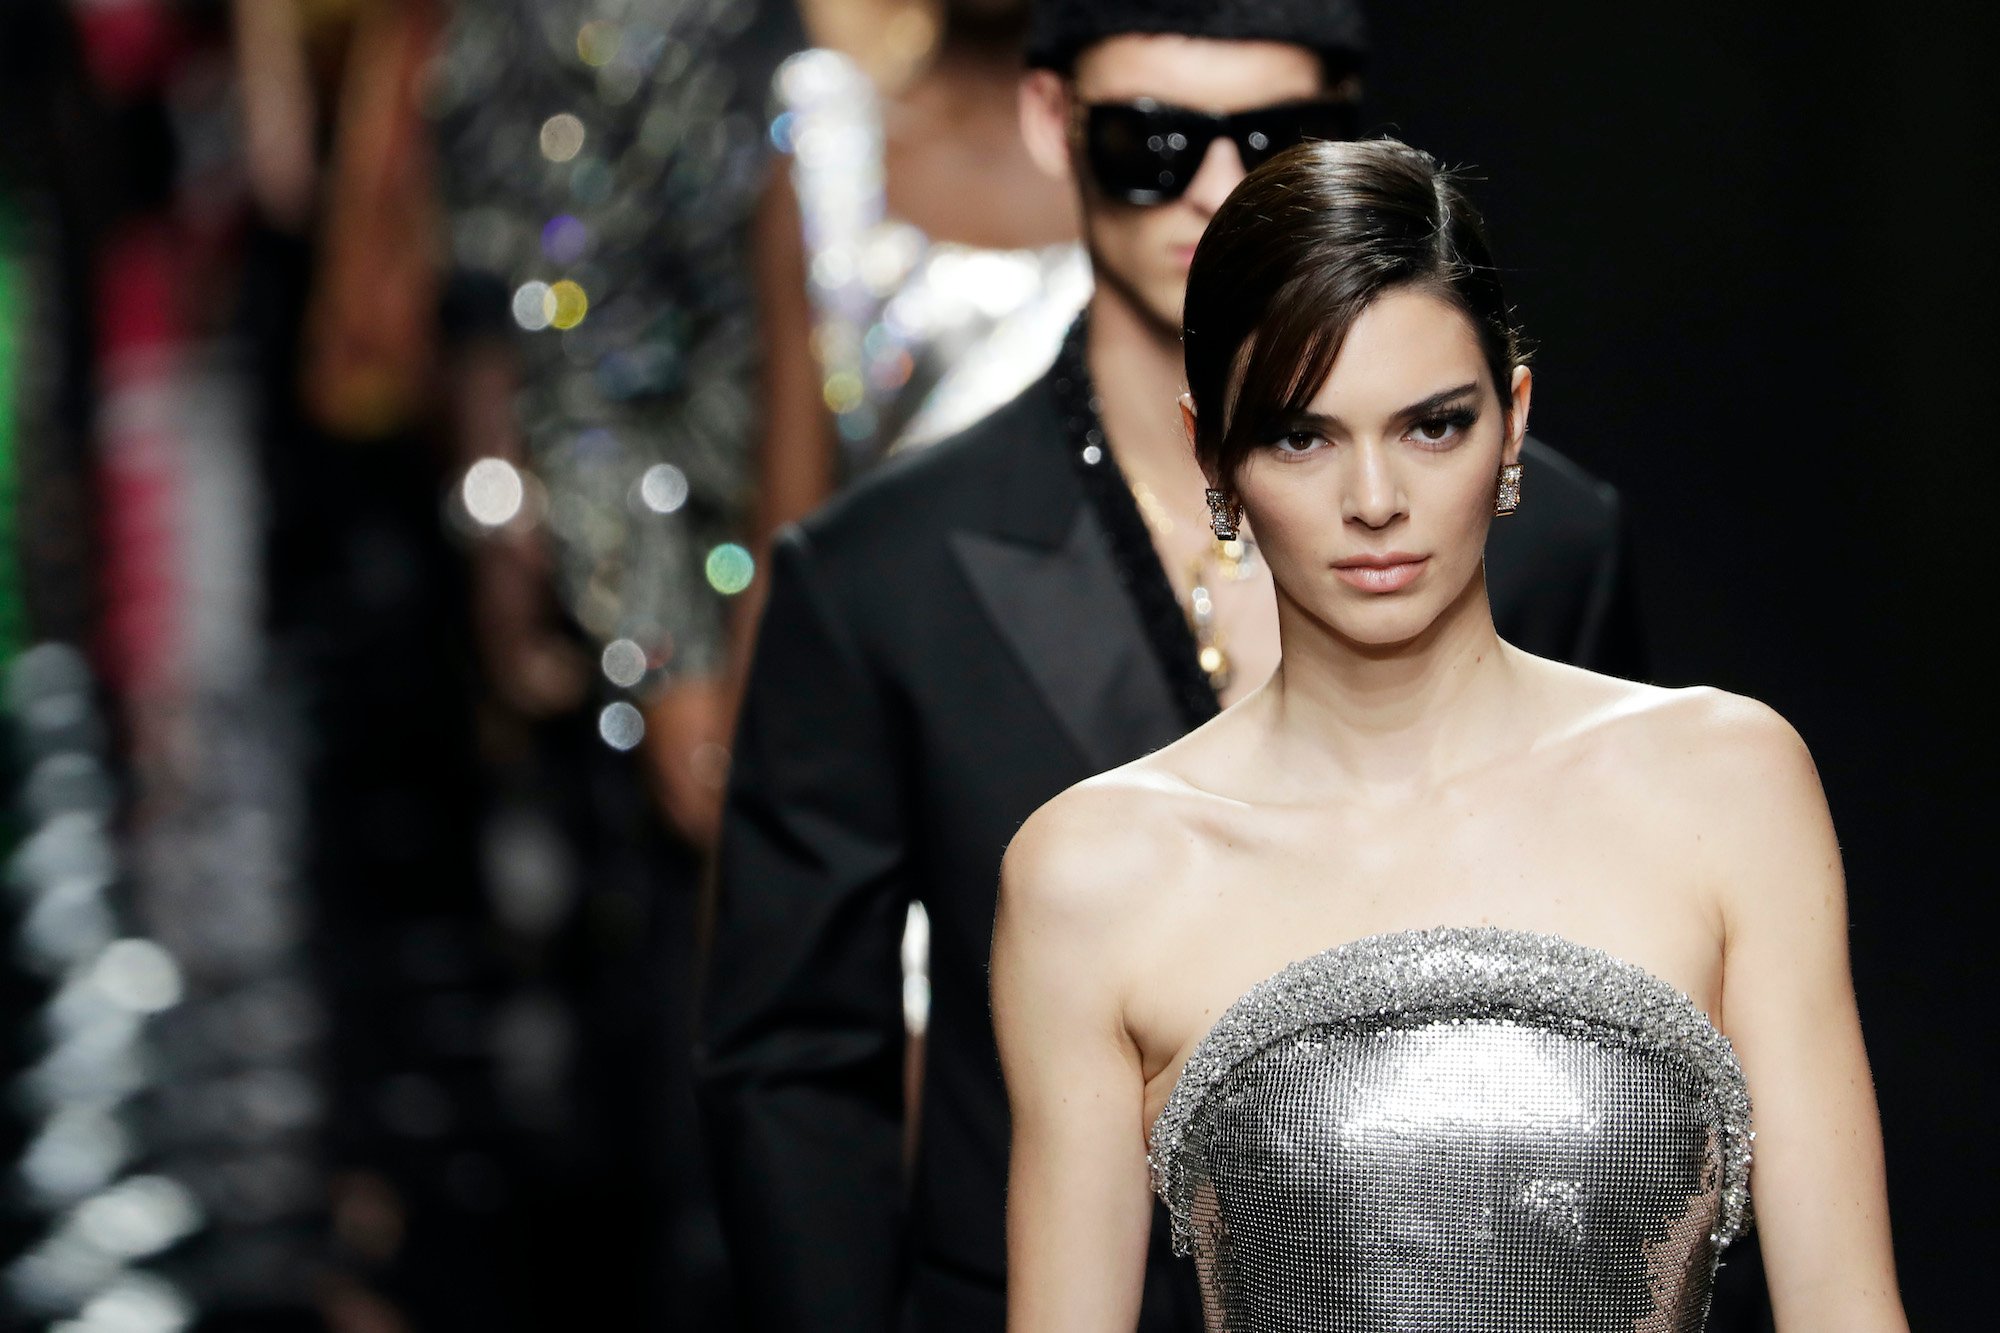 Kendall Jenner Fans Poke Fun at Unsettling Video: ‘I Would Love to Be Paid to Act This Weird’